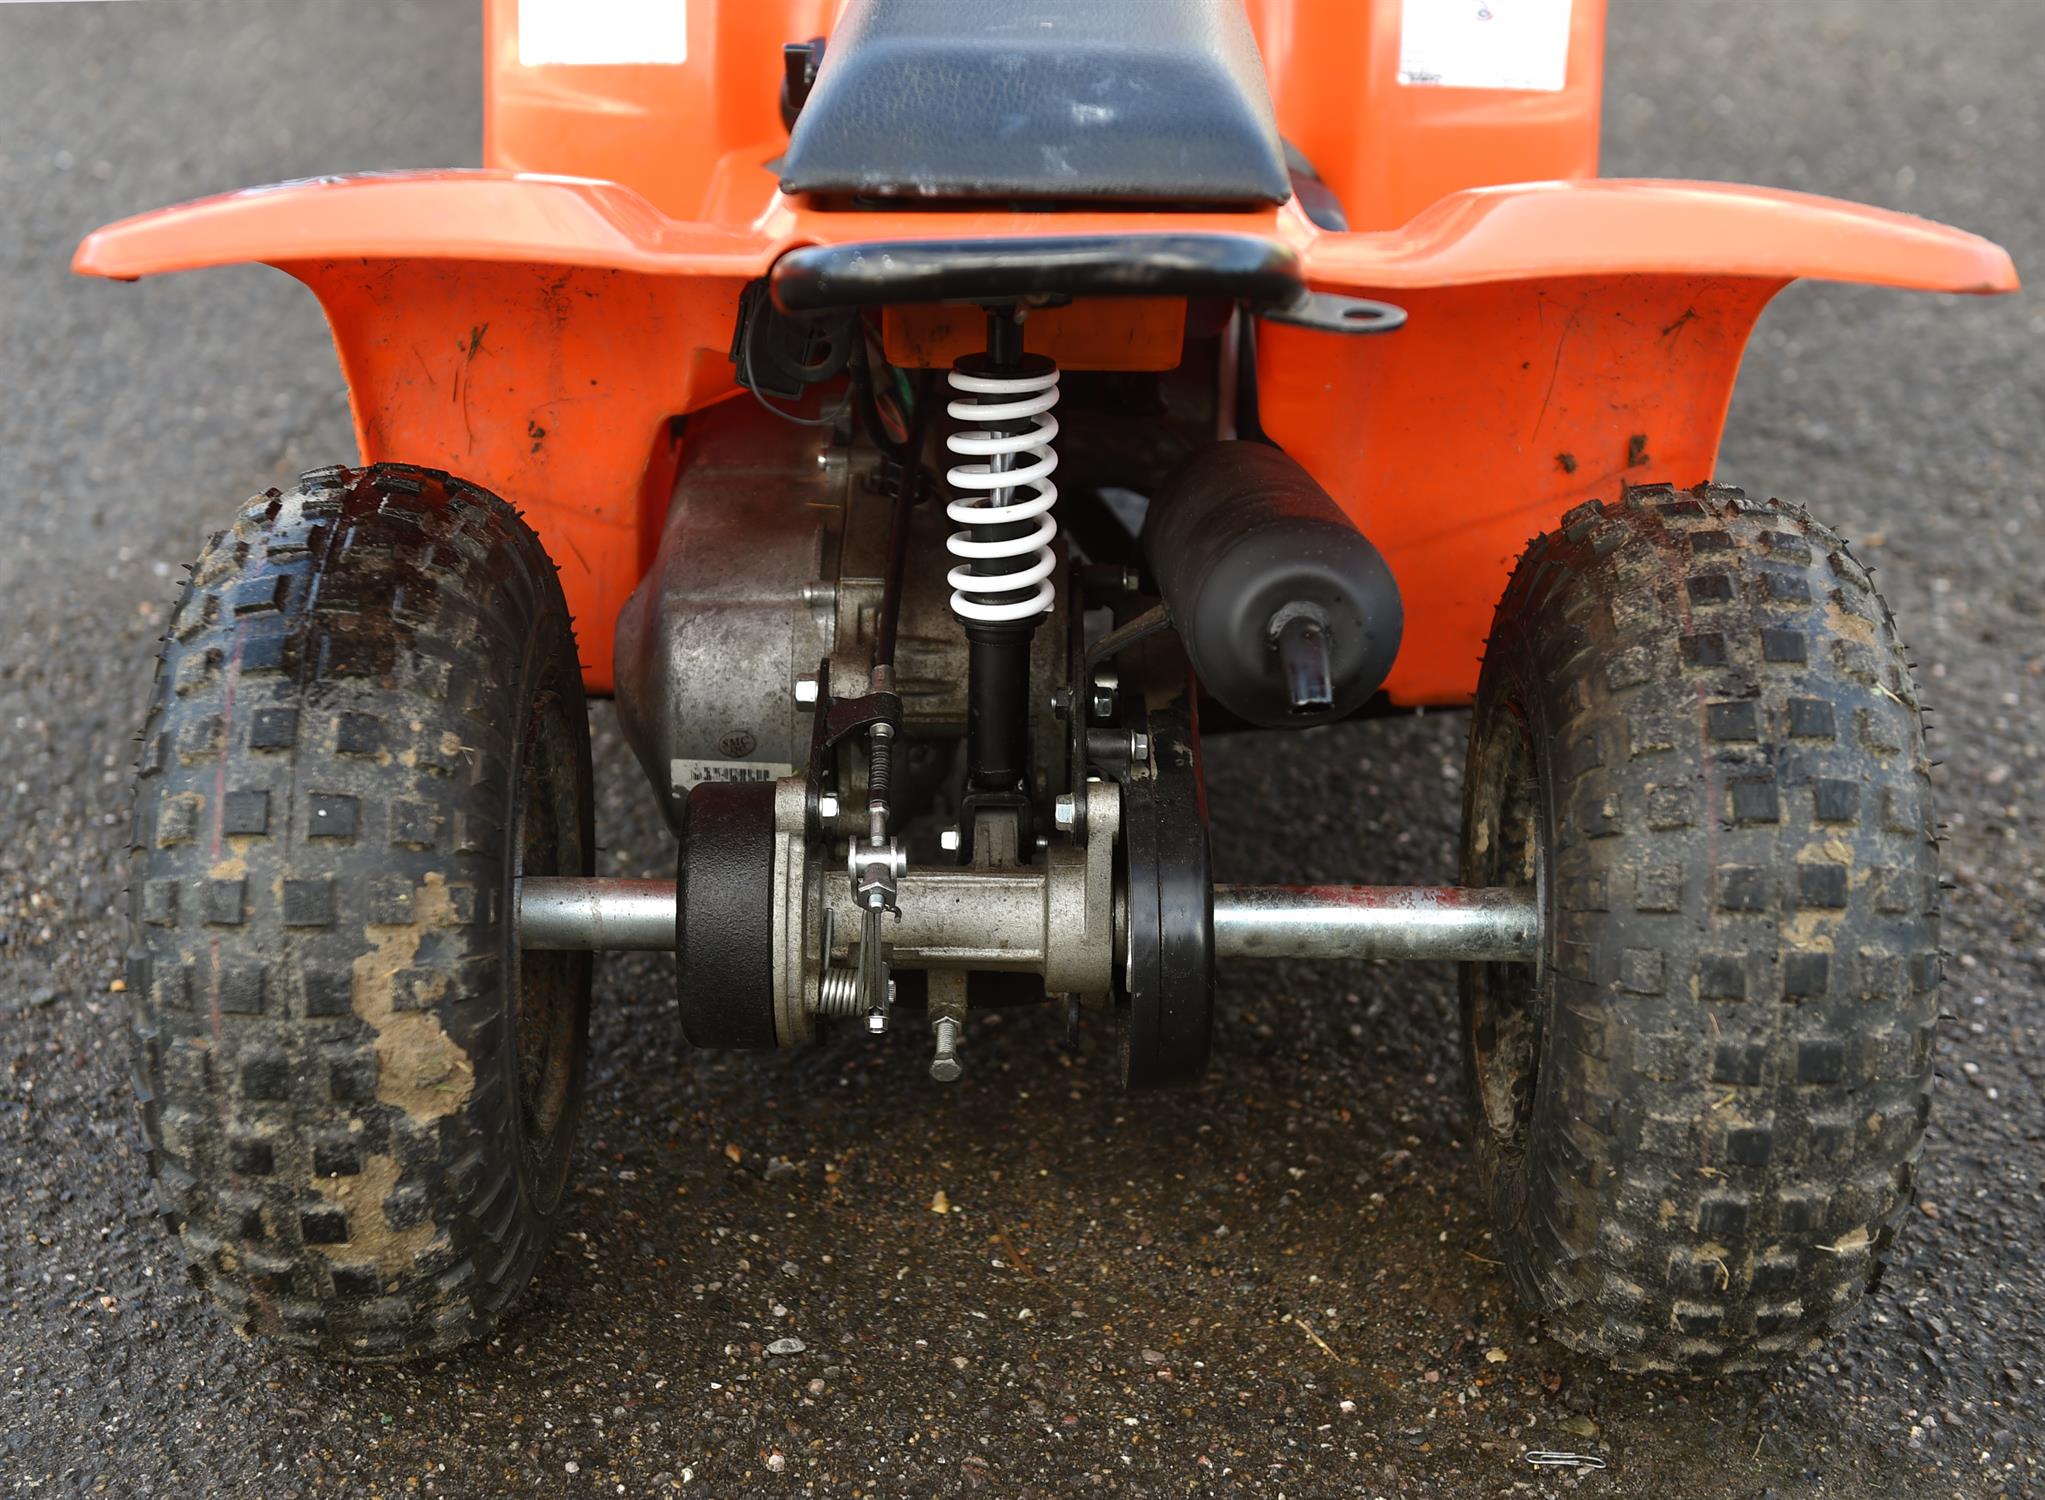 Buzz Quadzilla 50cc Quad bike. New battery fitted. Starts and runs well. A great first quad bike - Image 2 of 7